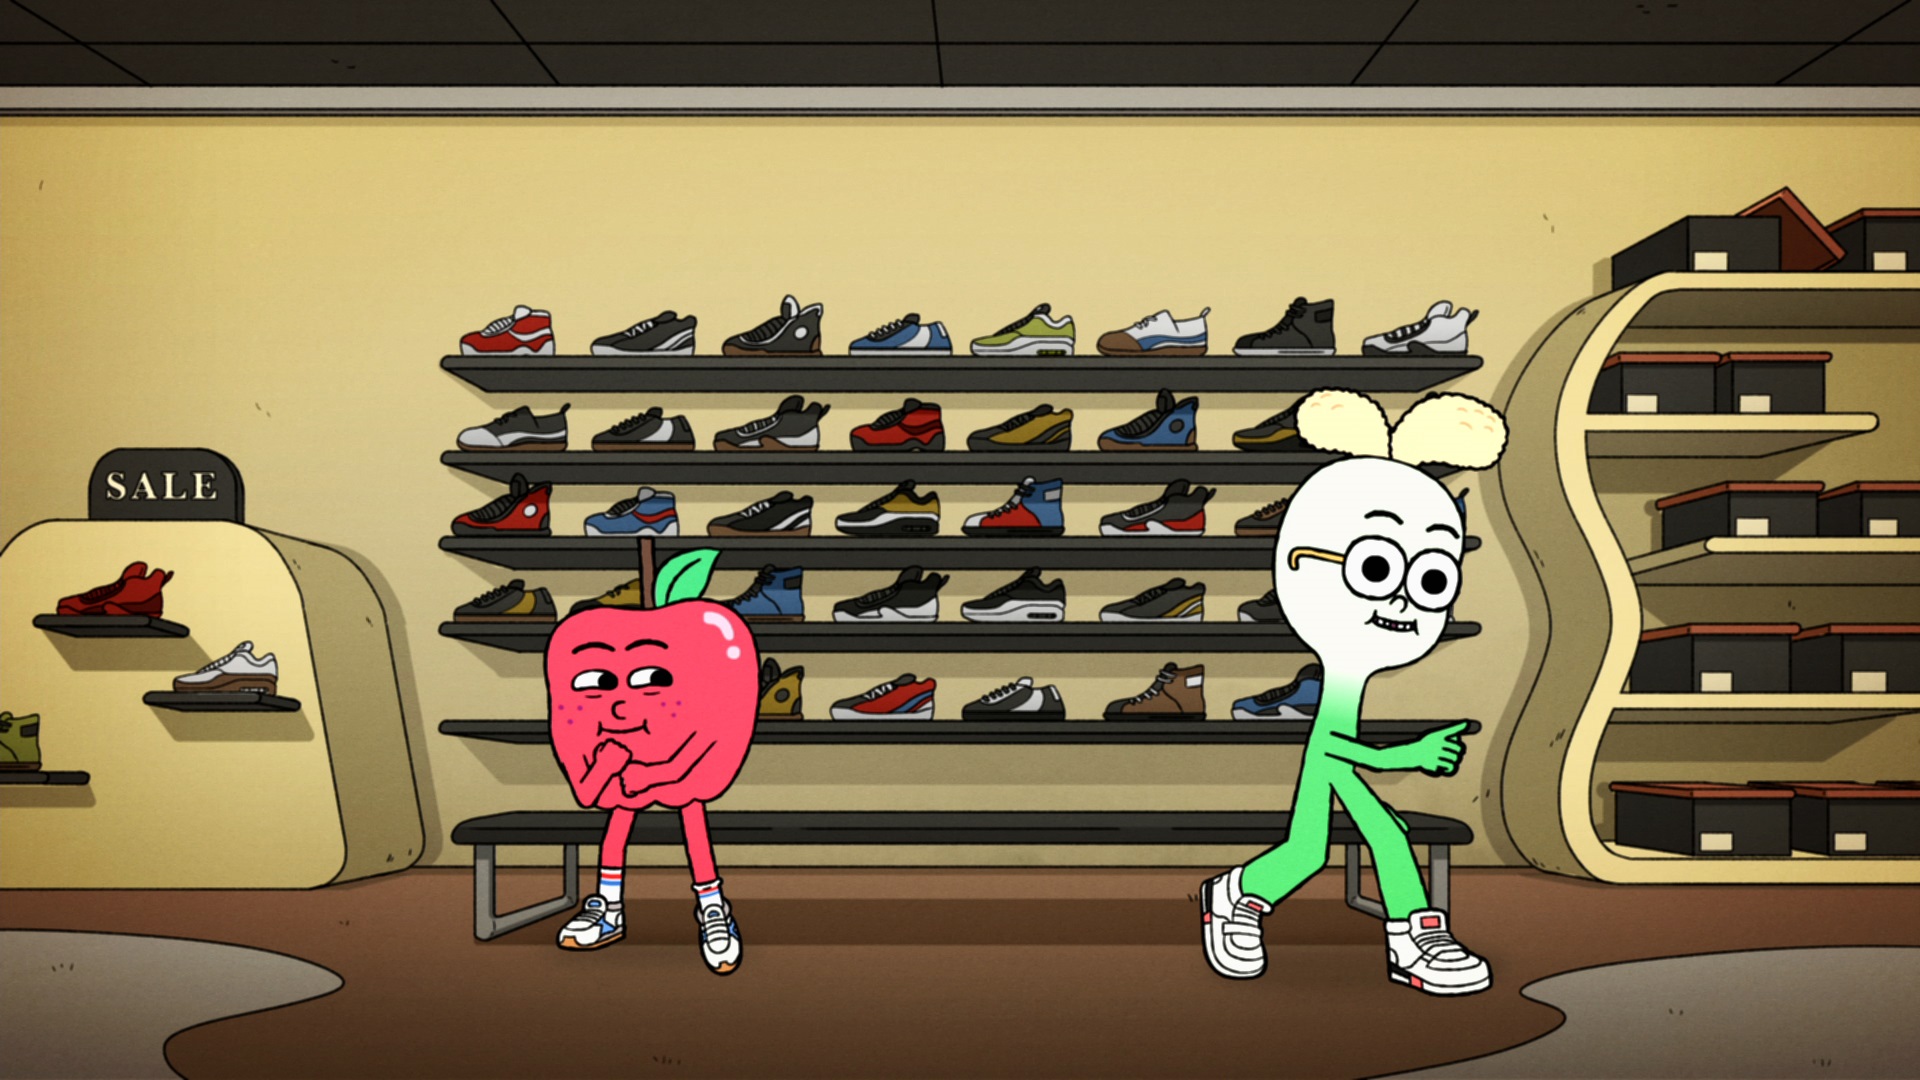 "A New Life" Begins for Apple and Onion on Cartoon Network's New Show